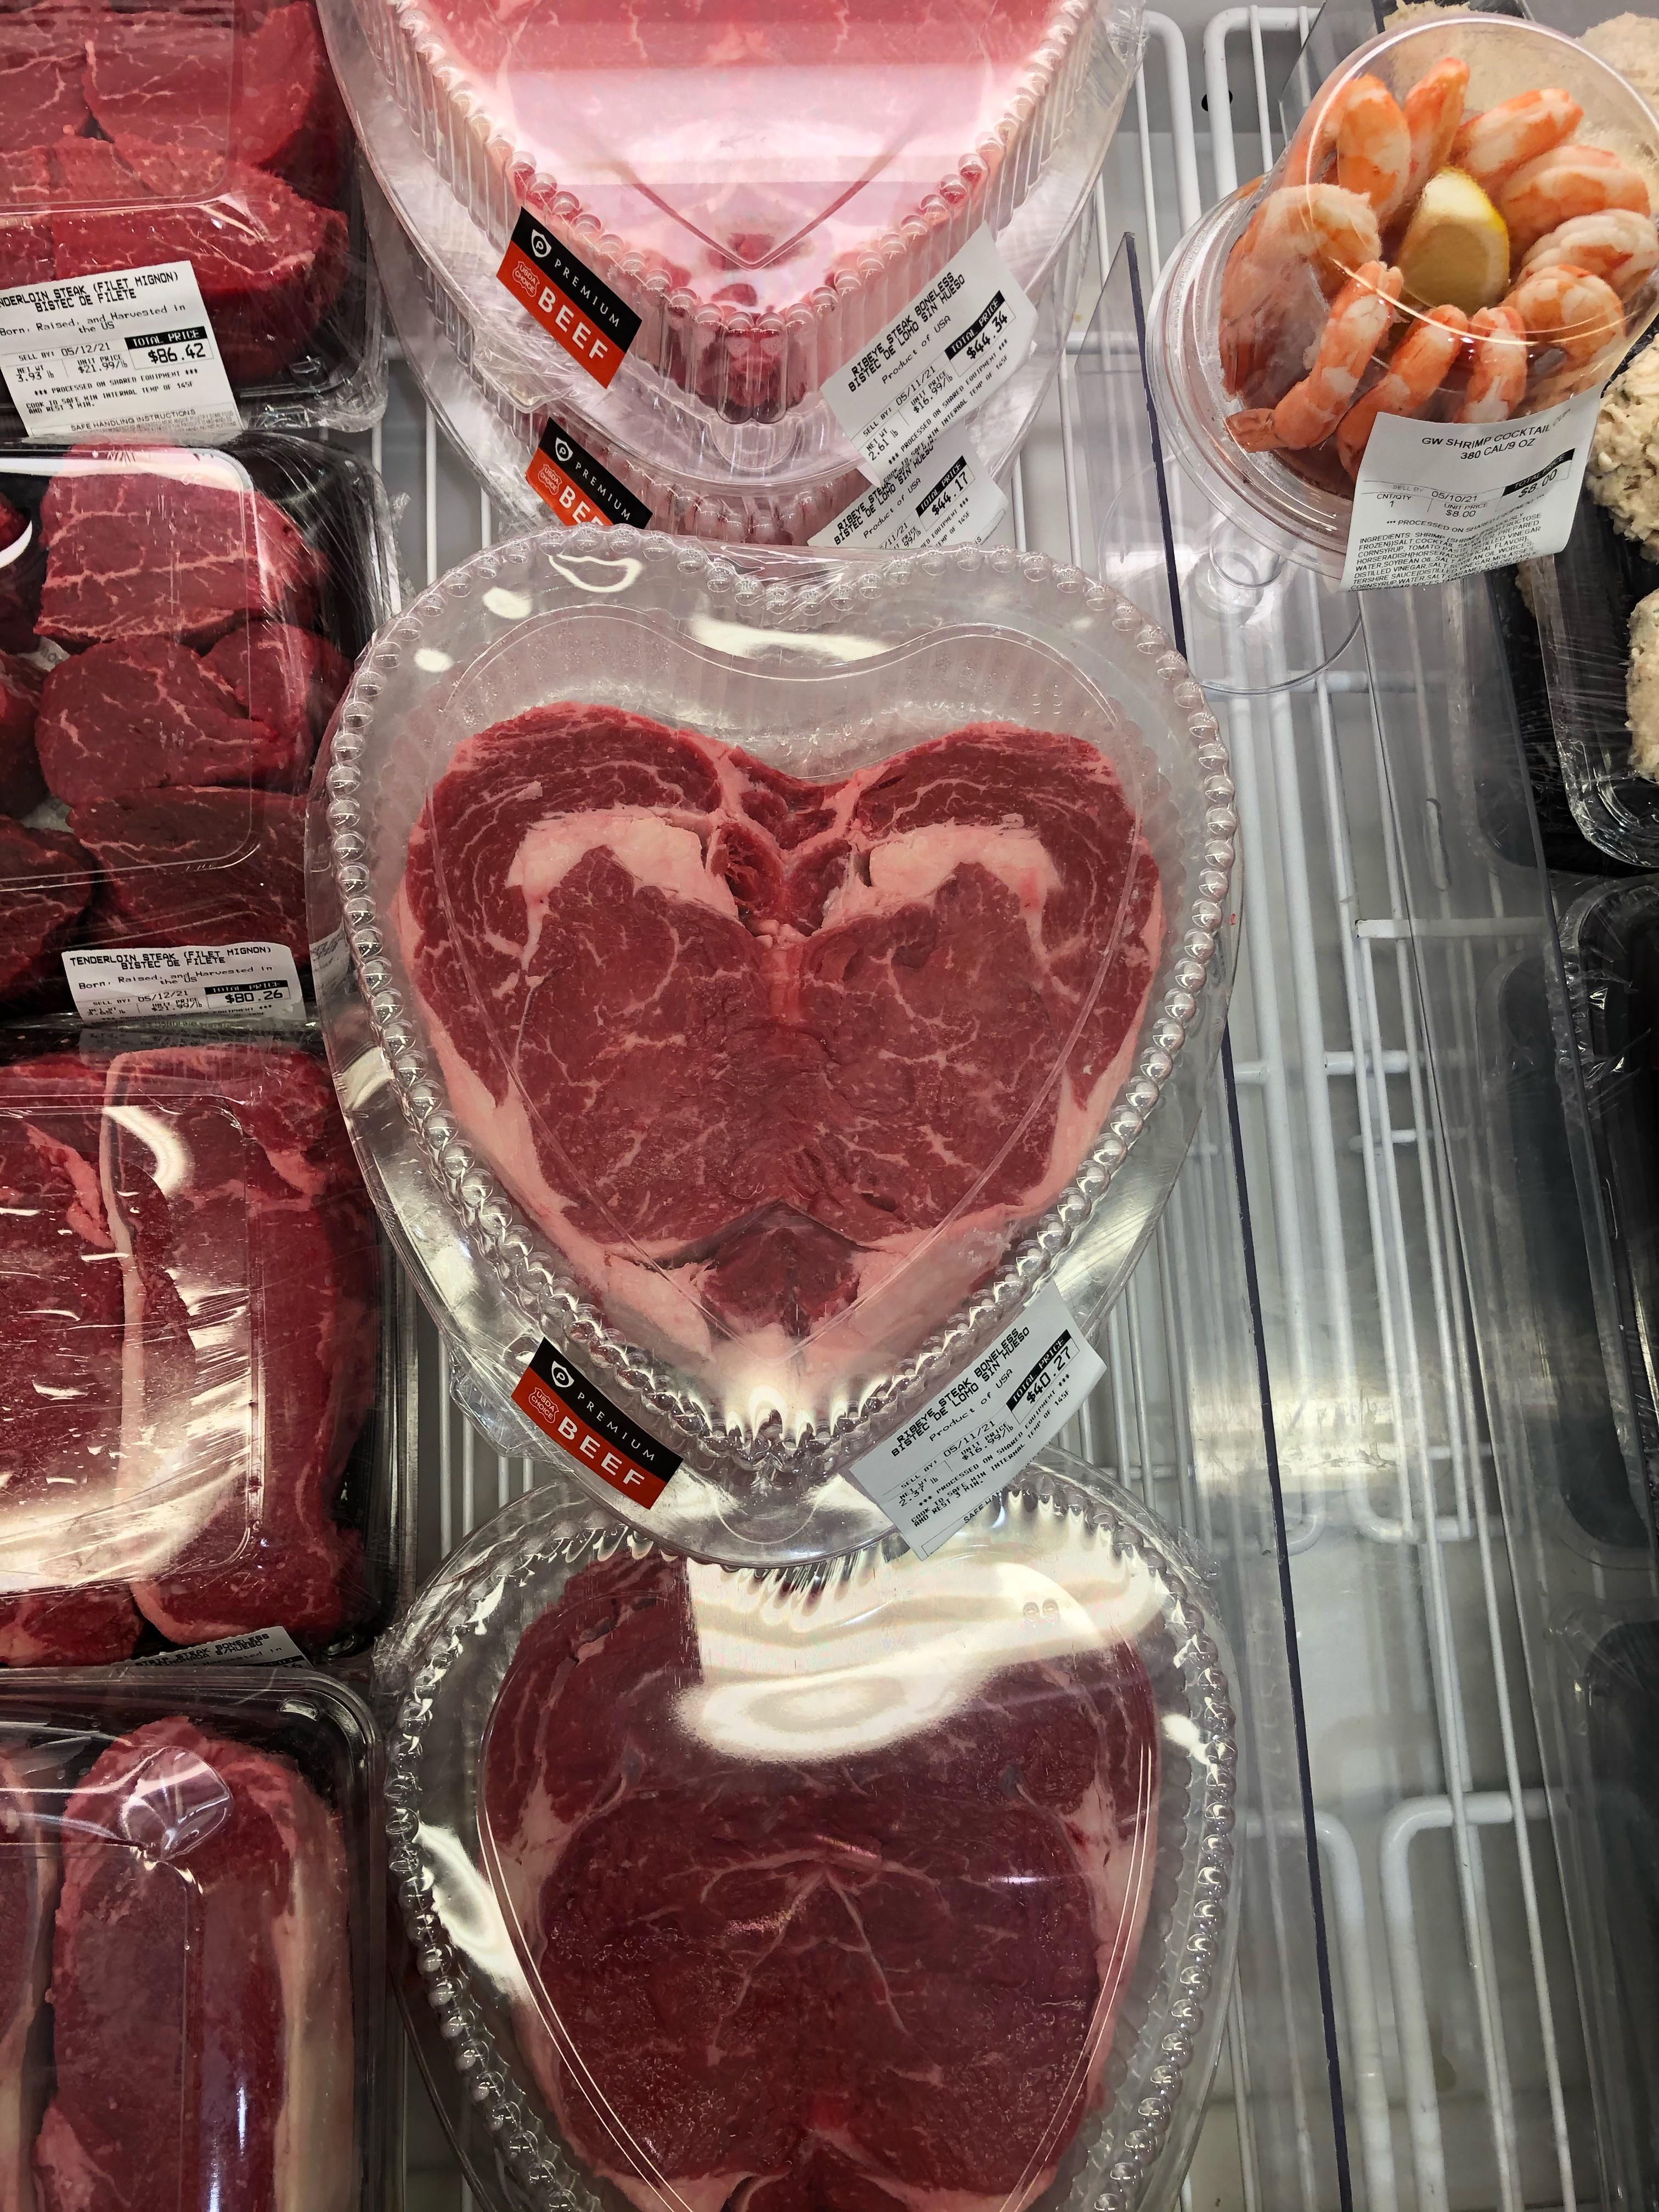 Because every mom wants a heart-shaped steak for Mother’s Day